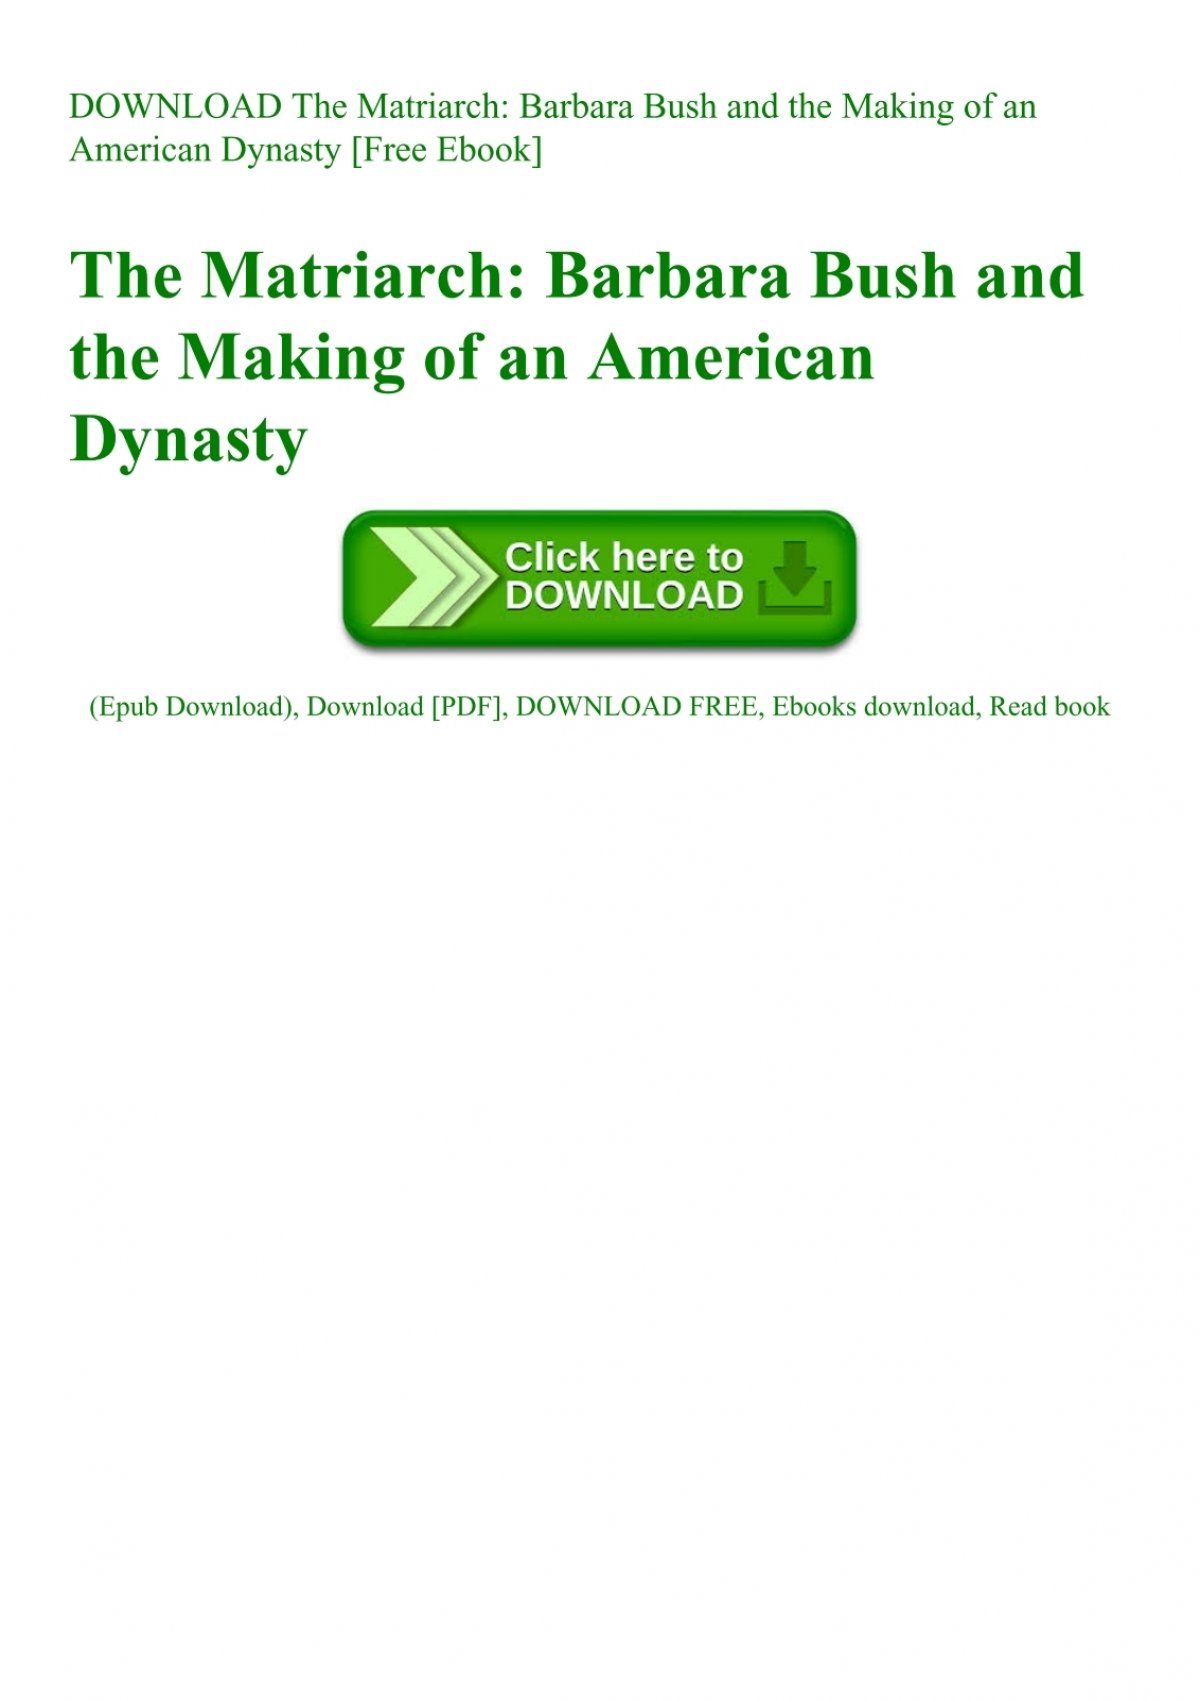 Download The Matriarch Barbara Bush And The Making Of An American